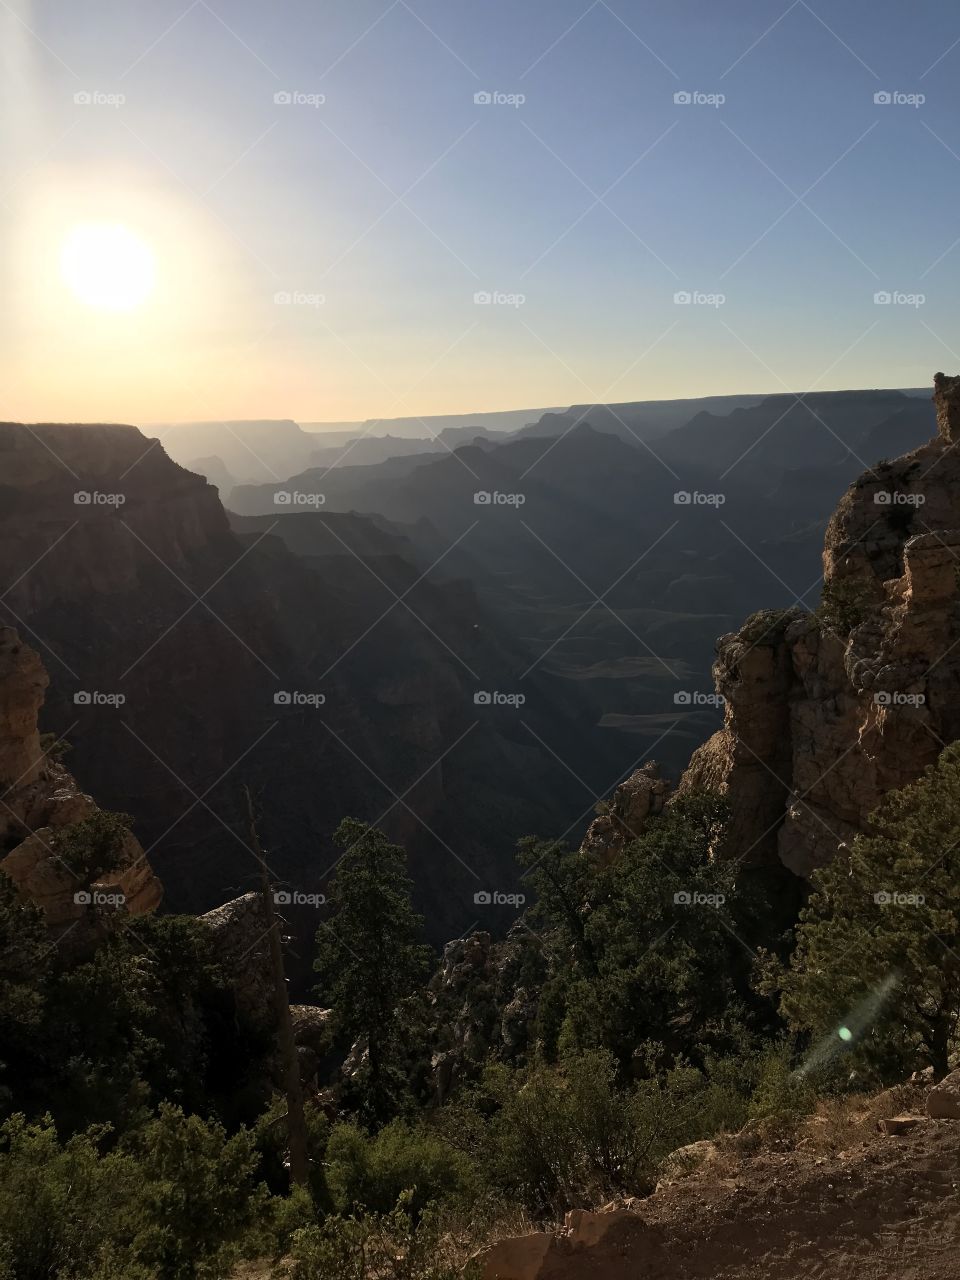 A beautiful, warm sunset in the Grand Canyon in Arizona. Summer vacation photography. 